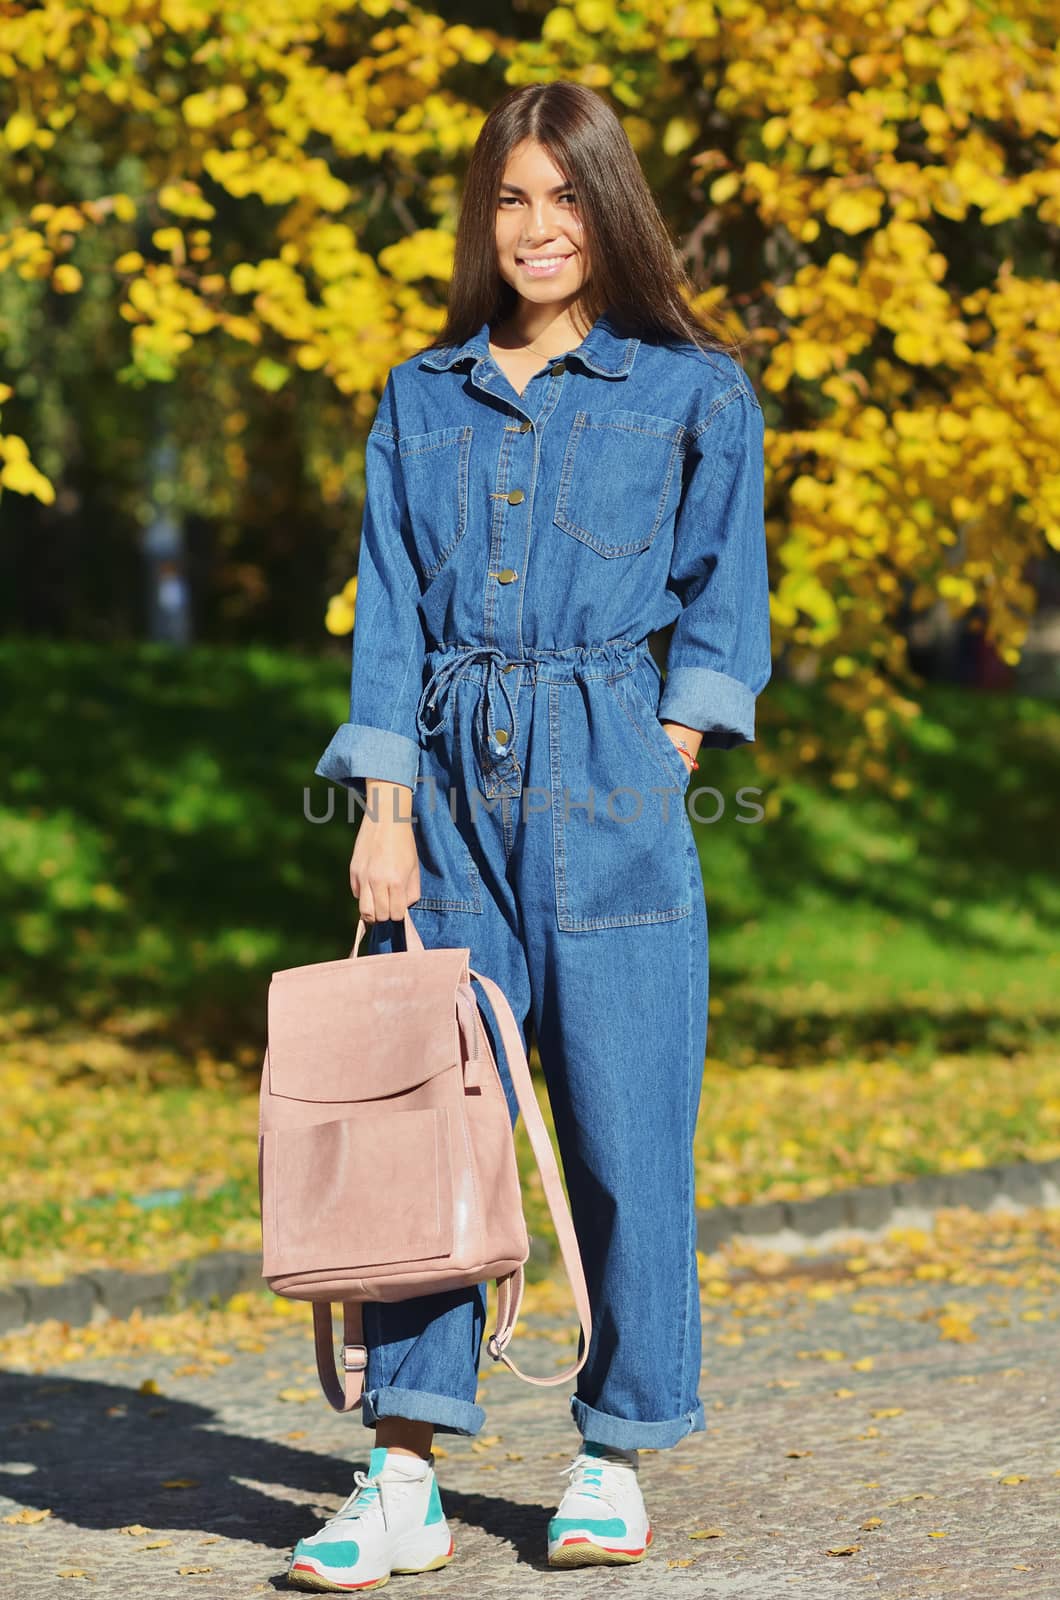 Girl denim clothes holding a pink backpack on a background of yellow autumn in the campus